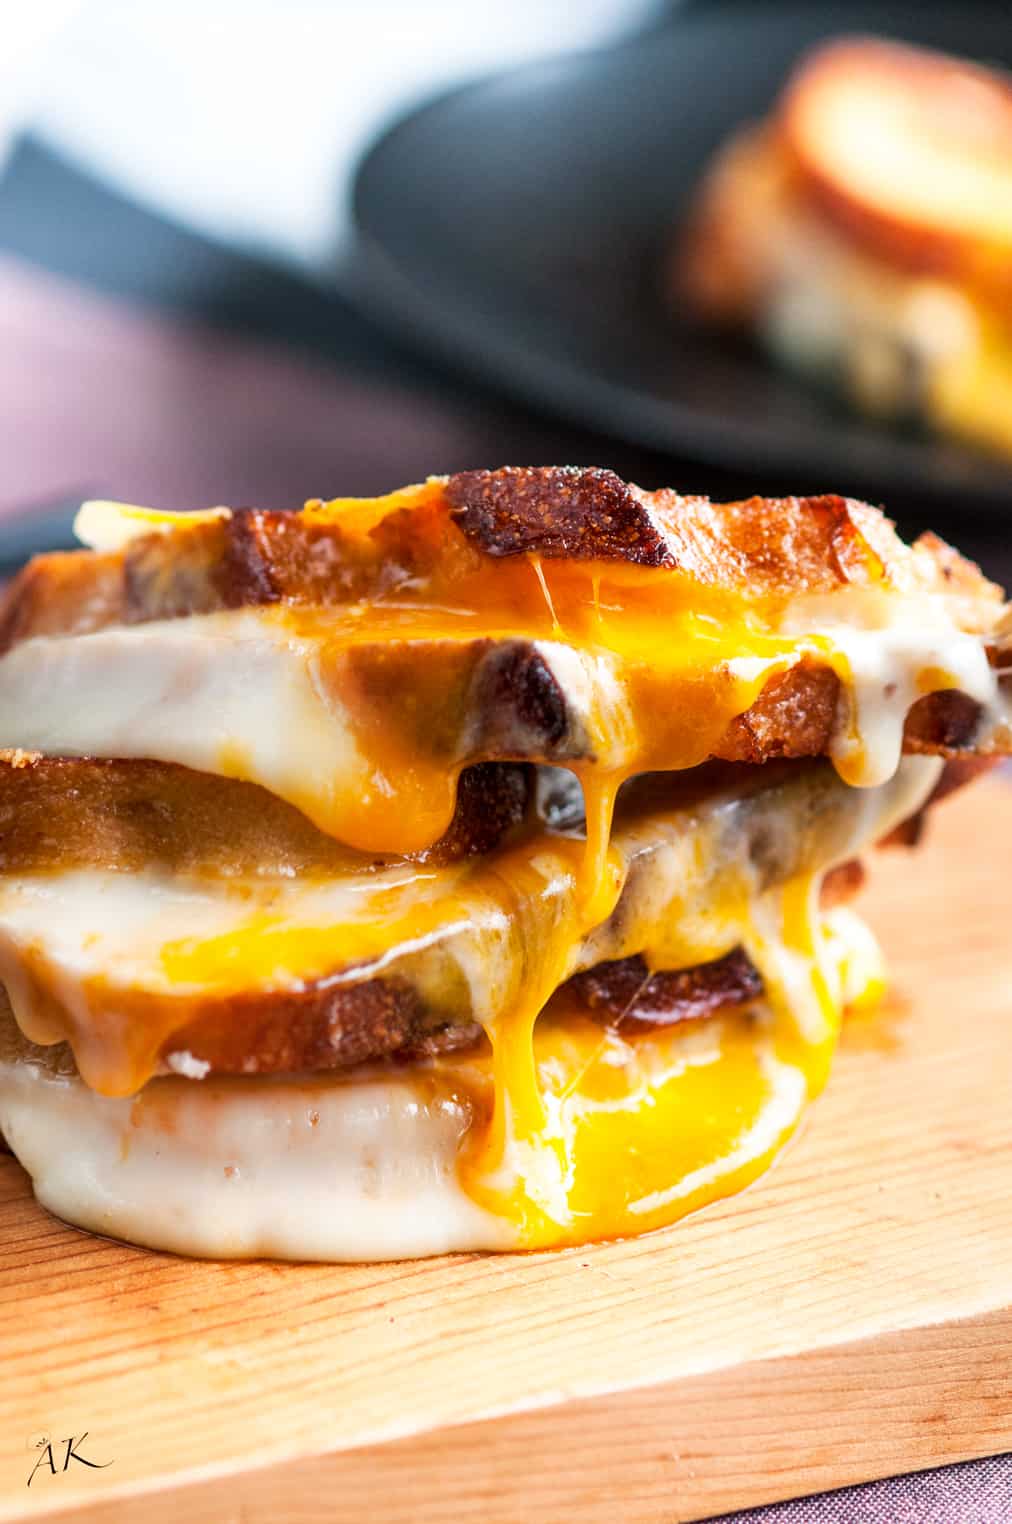 https://www.aberdeenskitchen.com/wp-content/uploads/2015/09/classic-grilled-cheese-with-3-cheeses.jpg